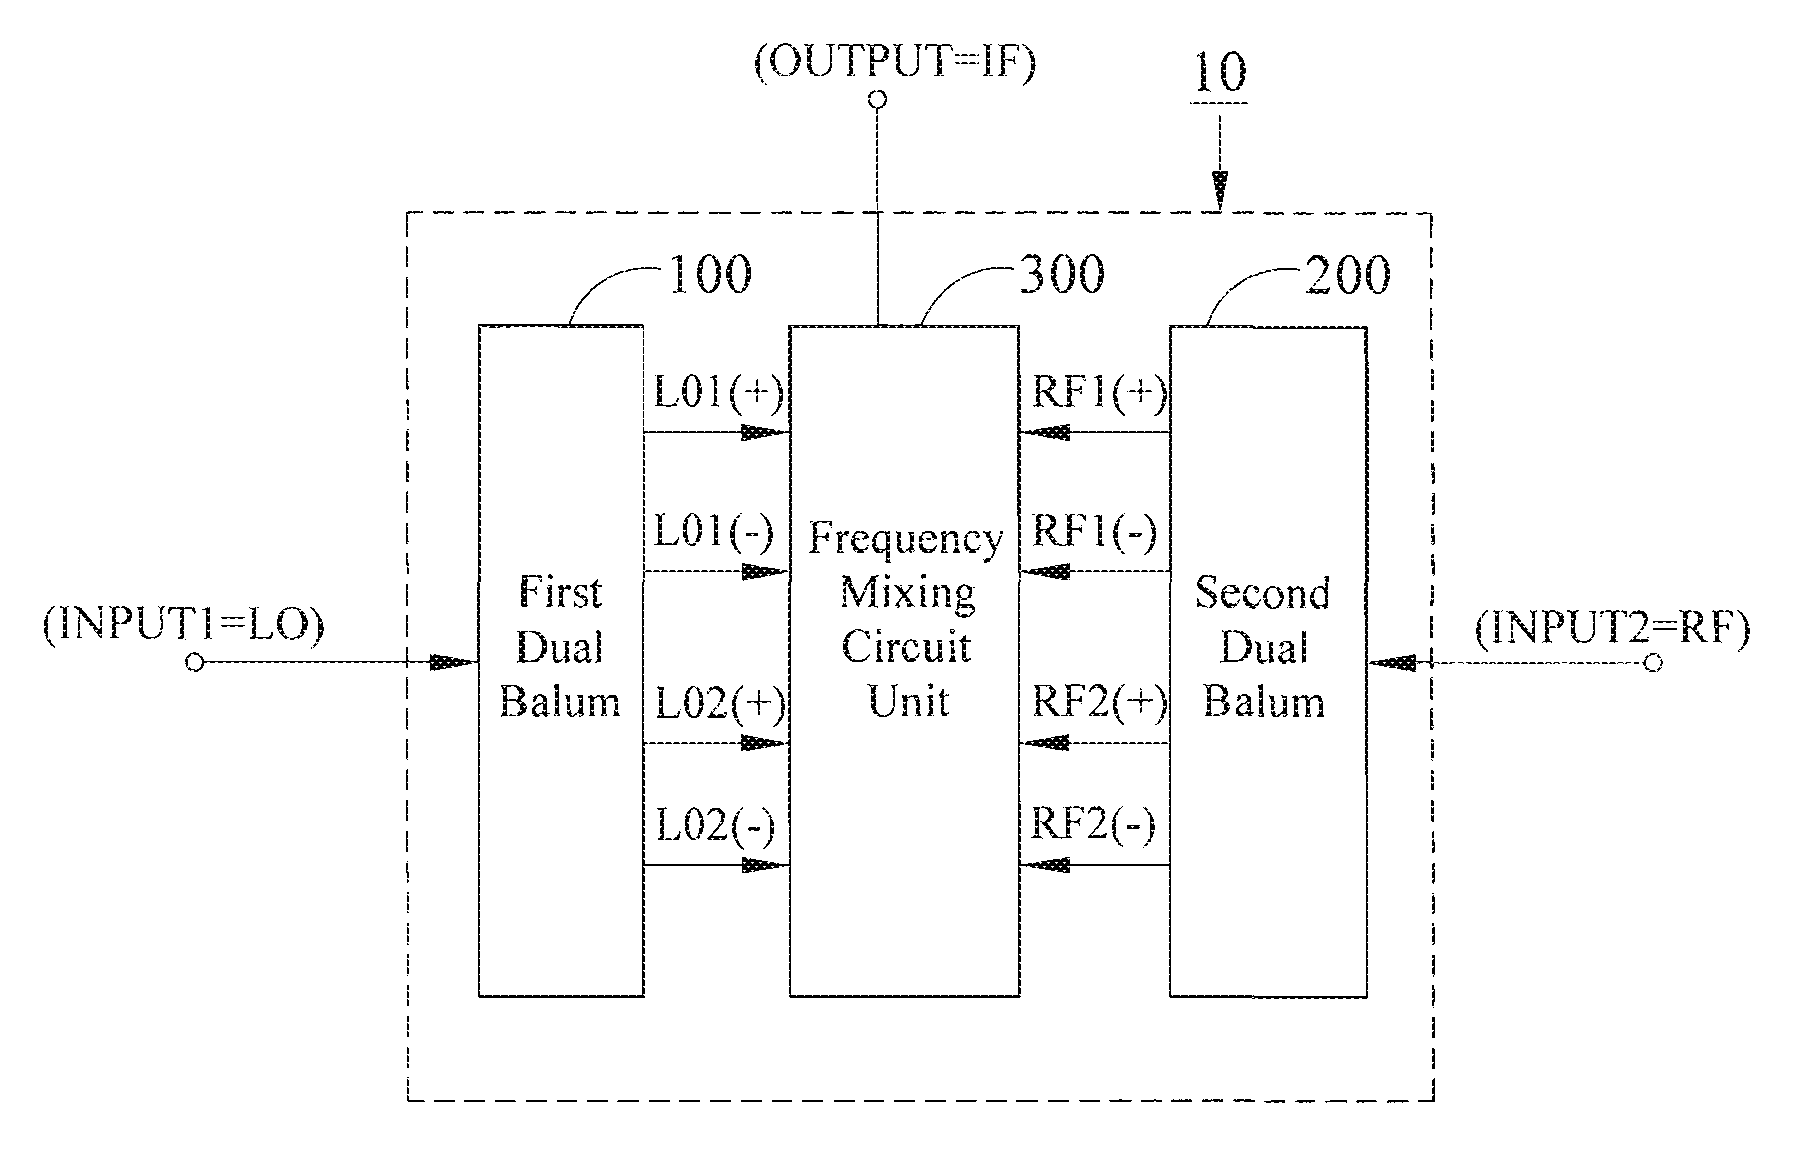 Miniaturized dual-balanced mixer circuit based on a multilayer double spiral layout architecture